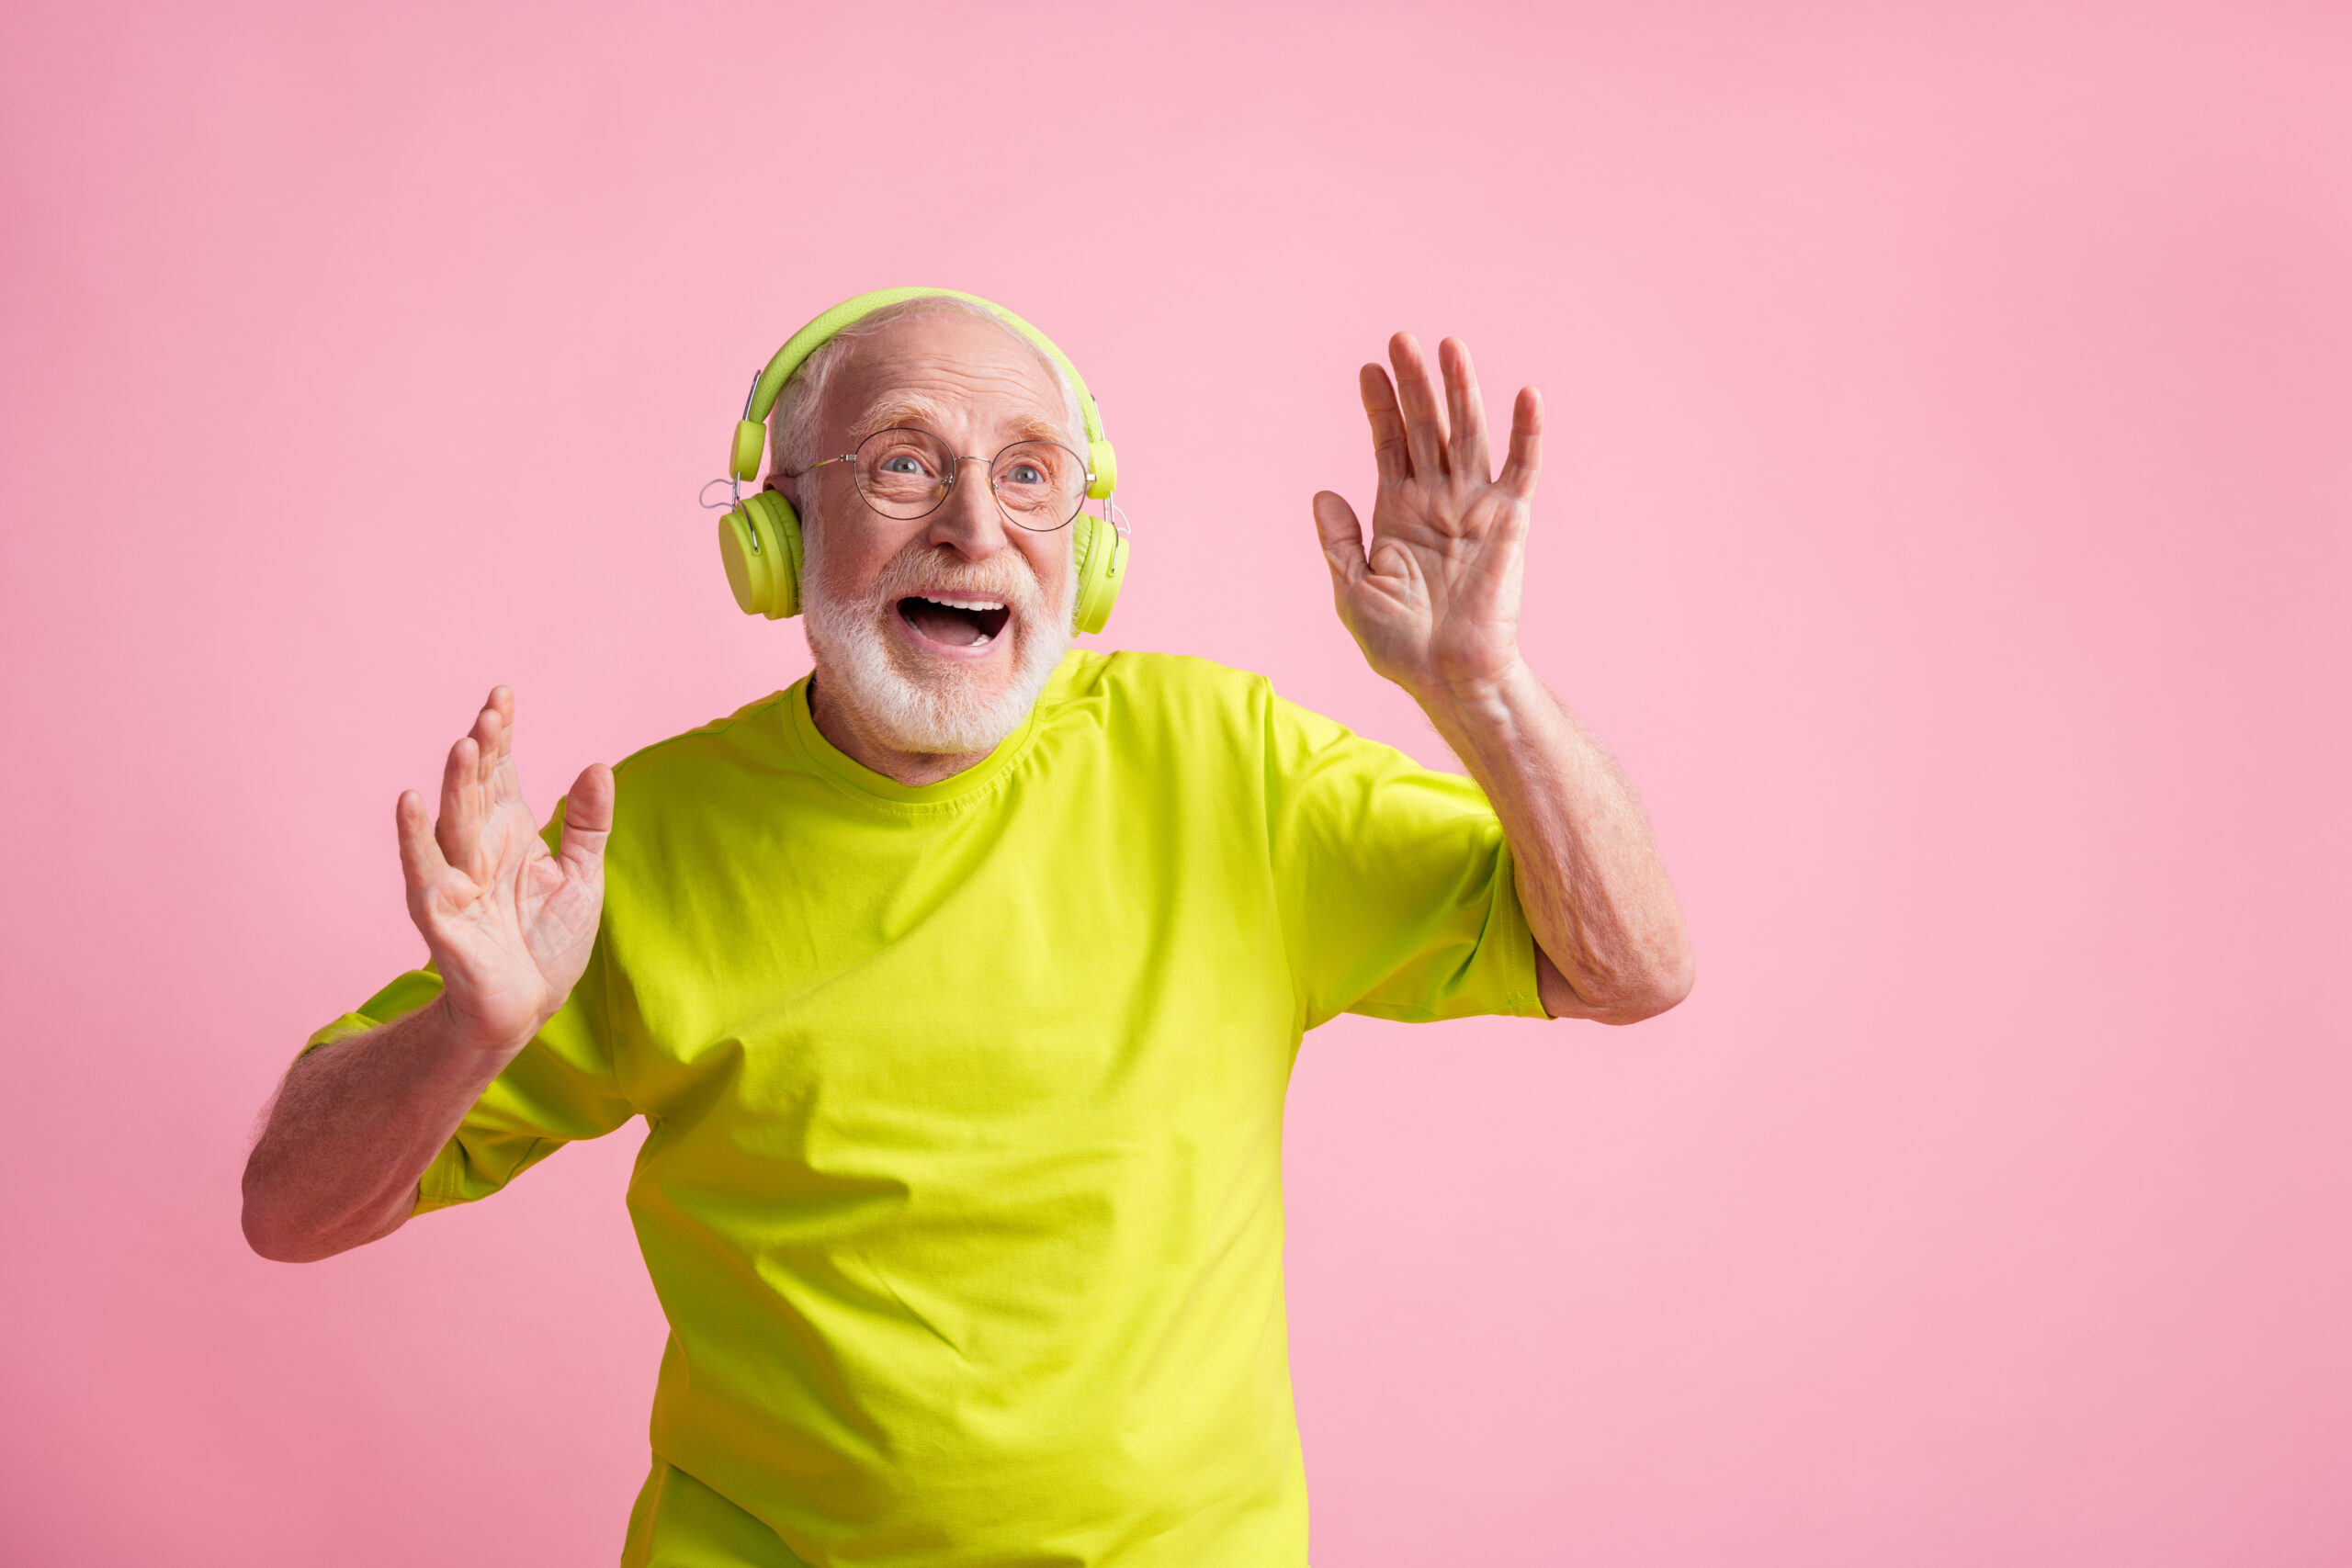 Music Therapy for Dementia: Tools for Improving Quality of Life